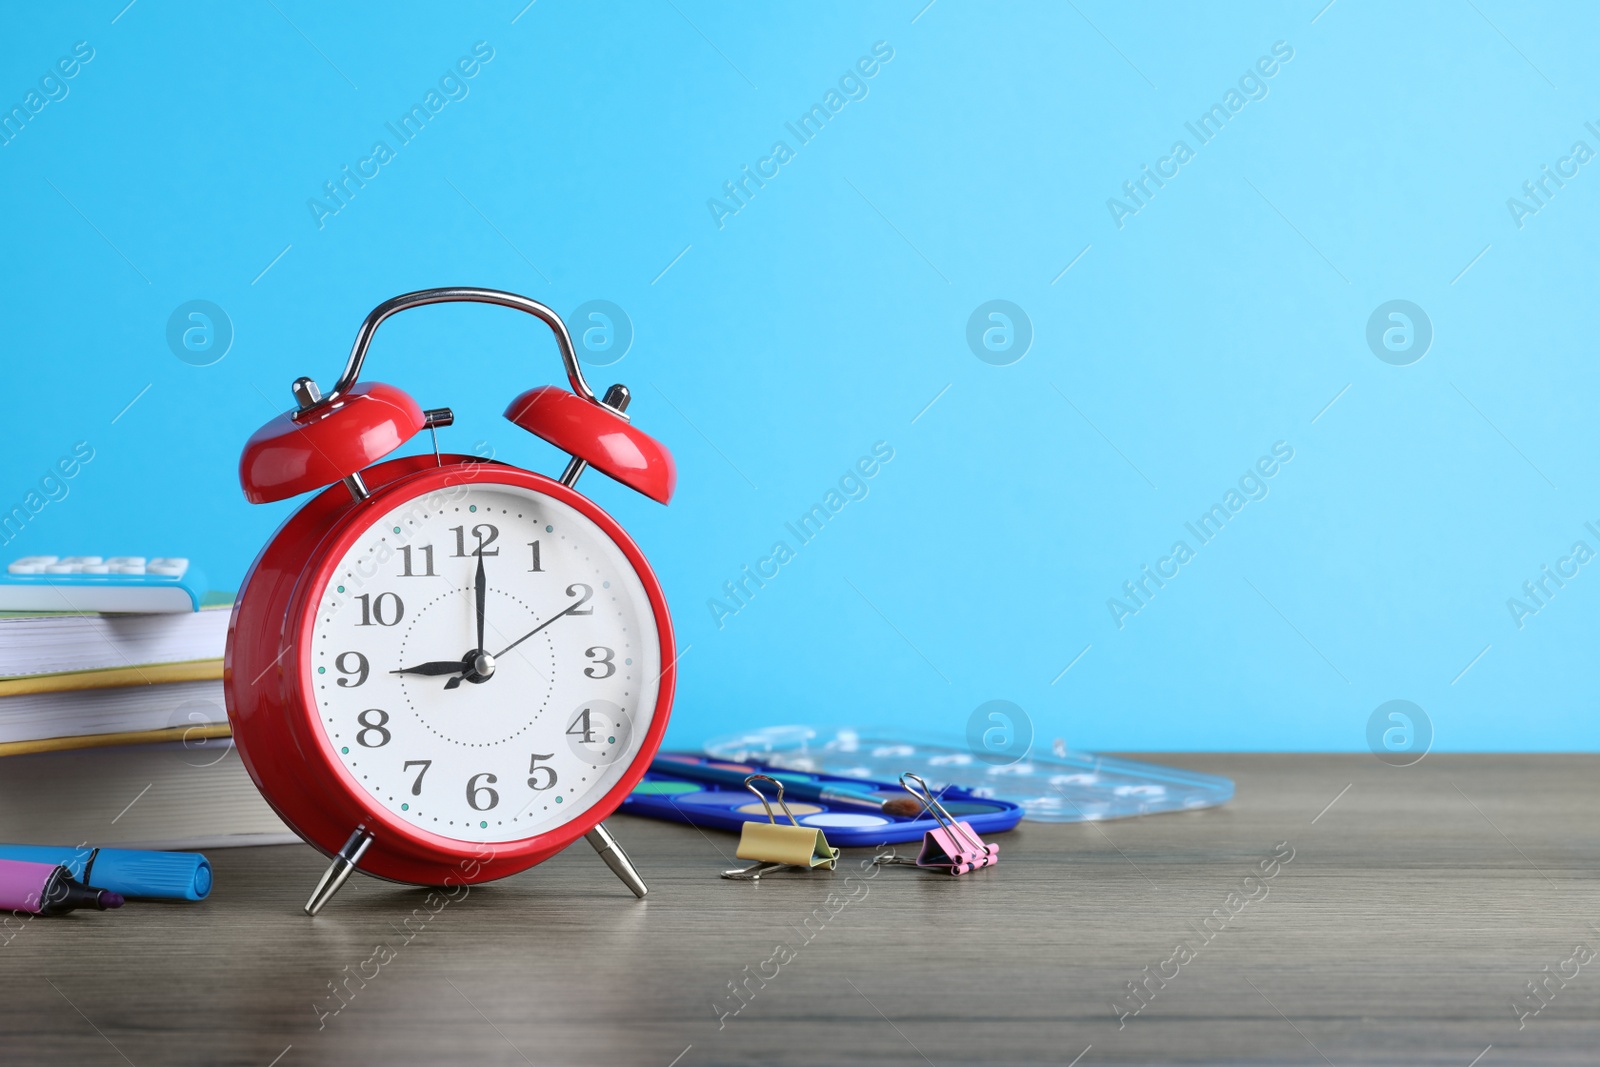 Photo of Red alarm clock and different stationery on wooden table against light blue background, space for text. School time